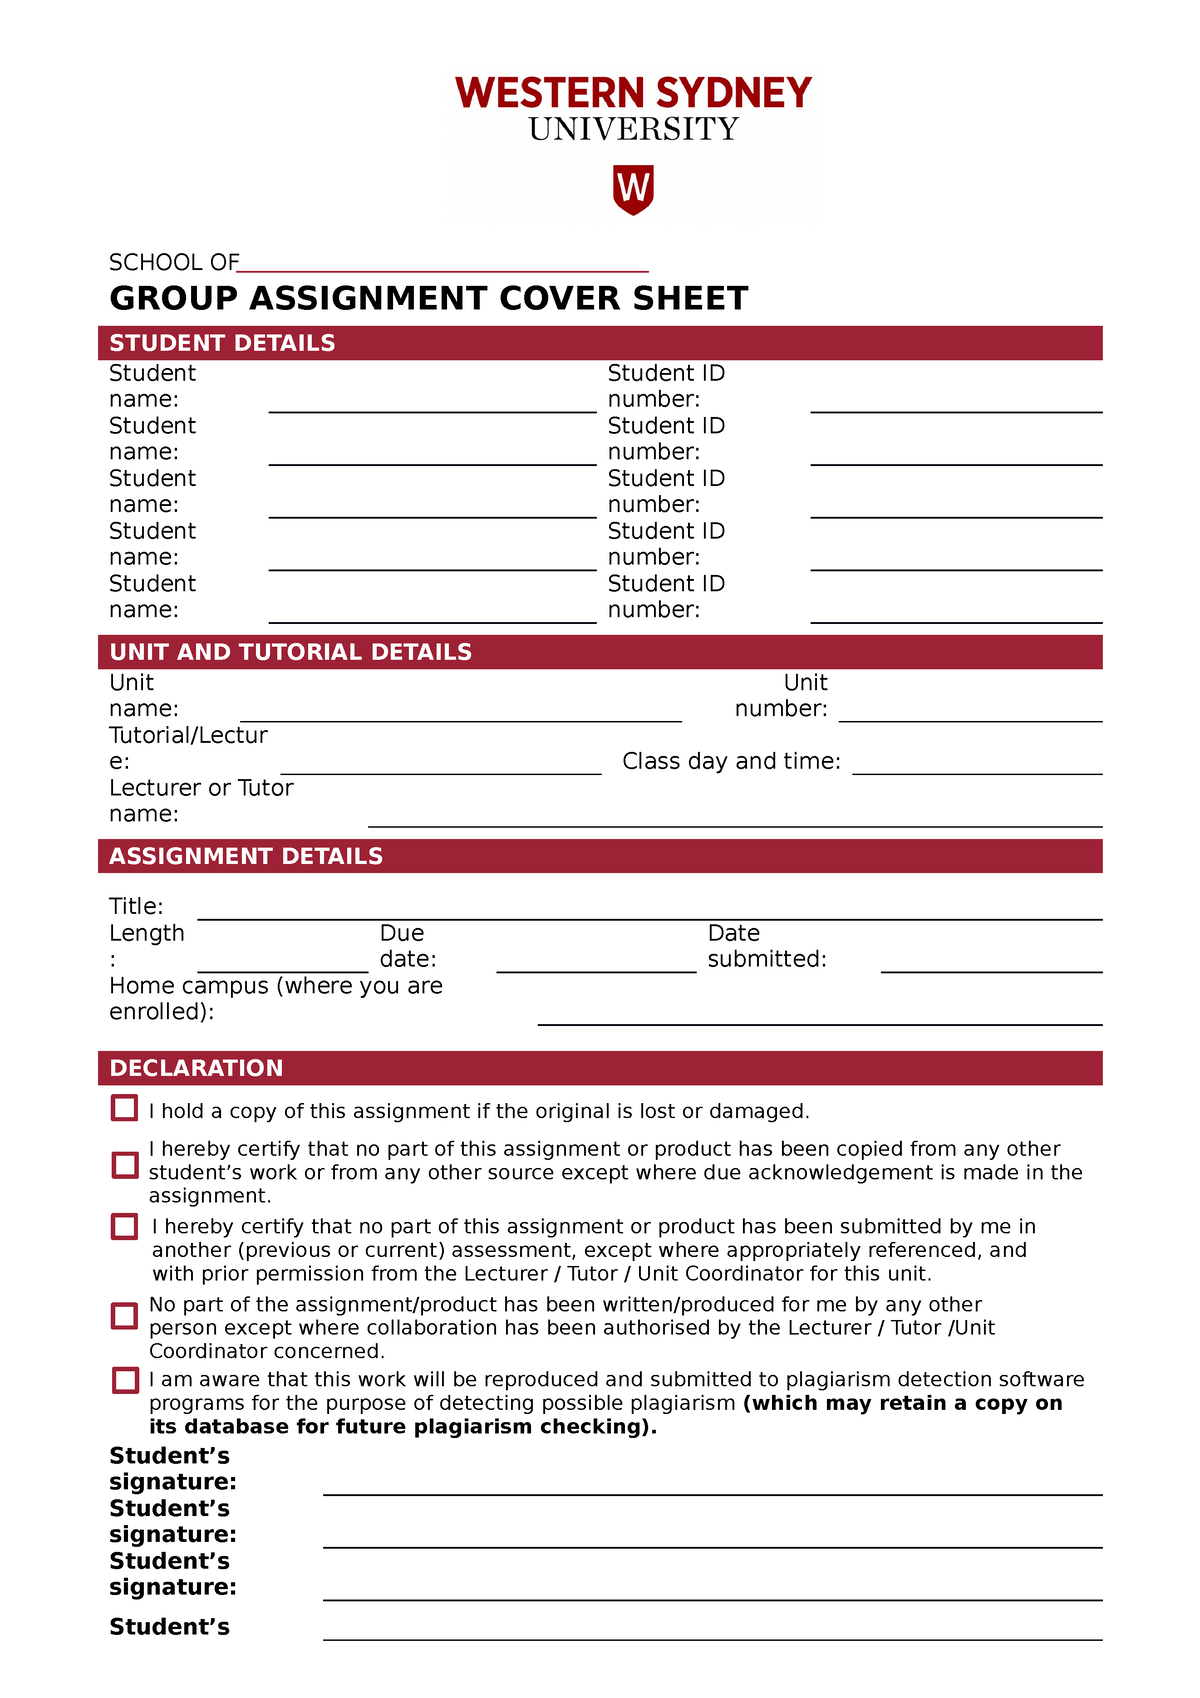 wsu group assignment cover sheet